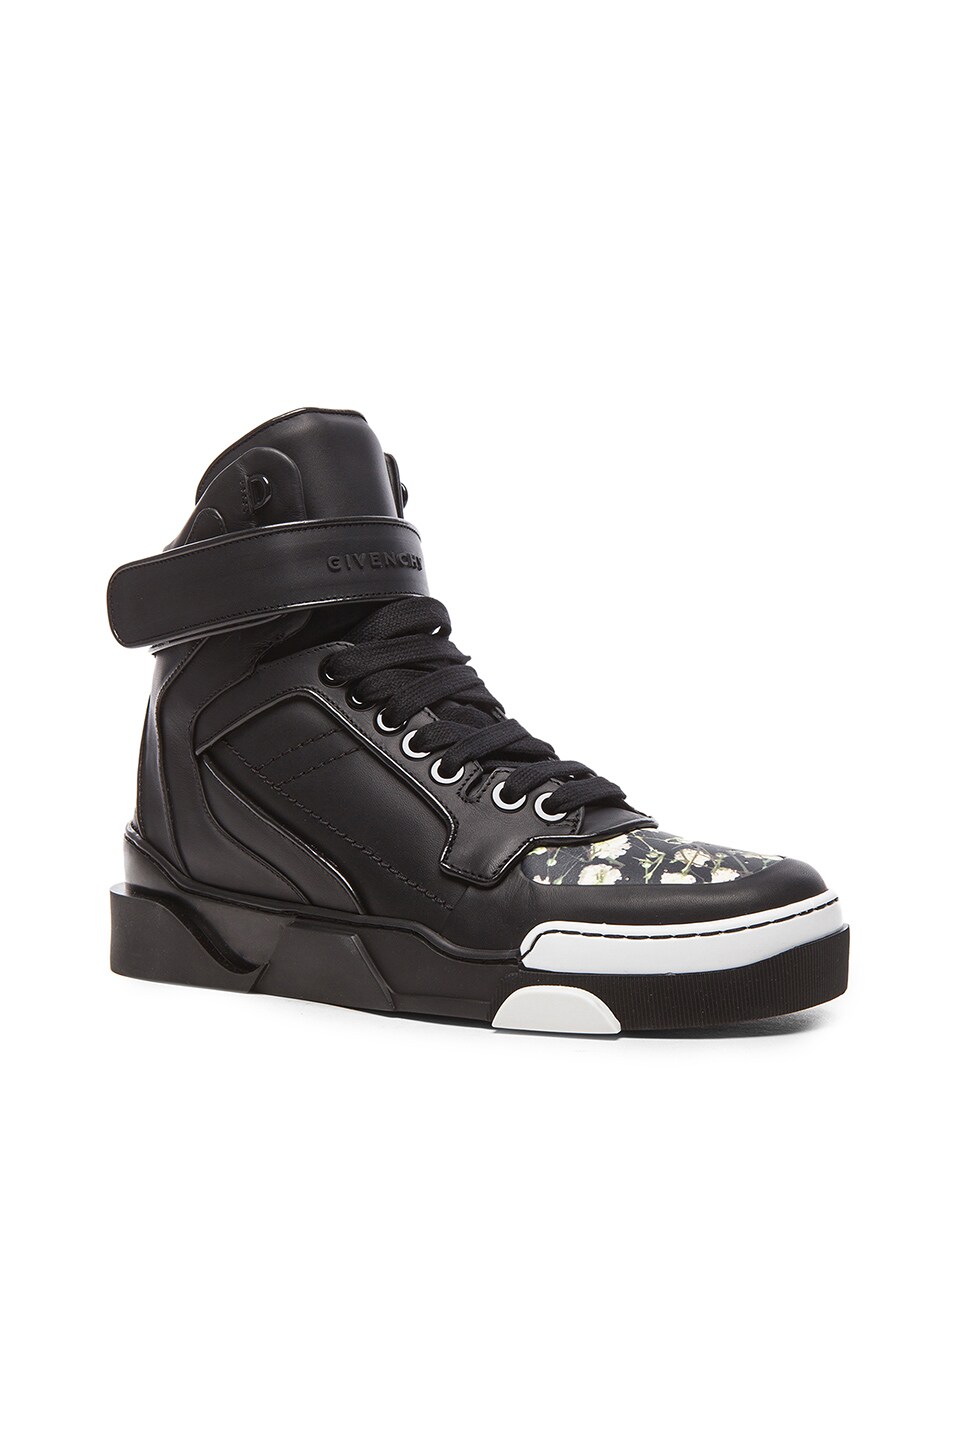 Image 1 of Givenchy Baby's Breath Toe Tyson Leather Sneakers in Black & Multi